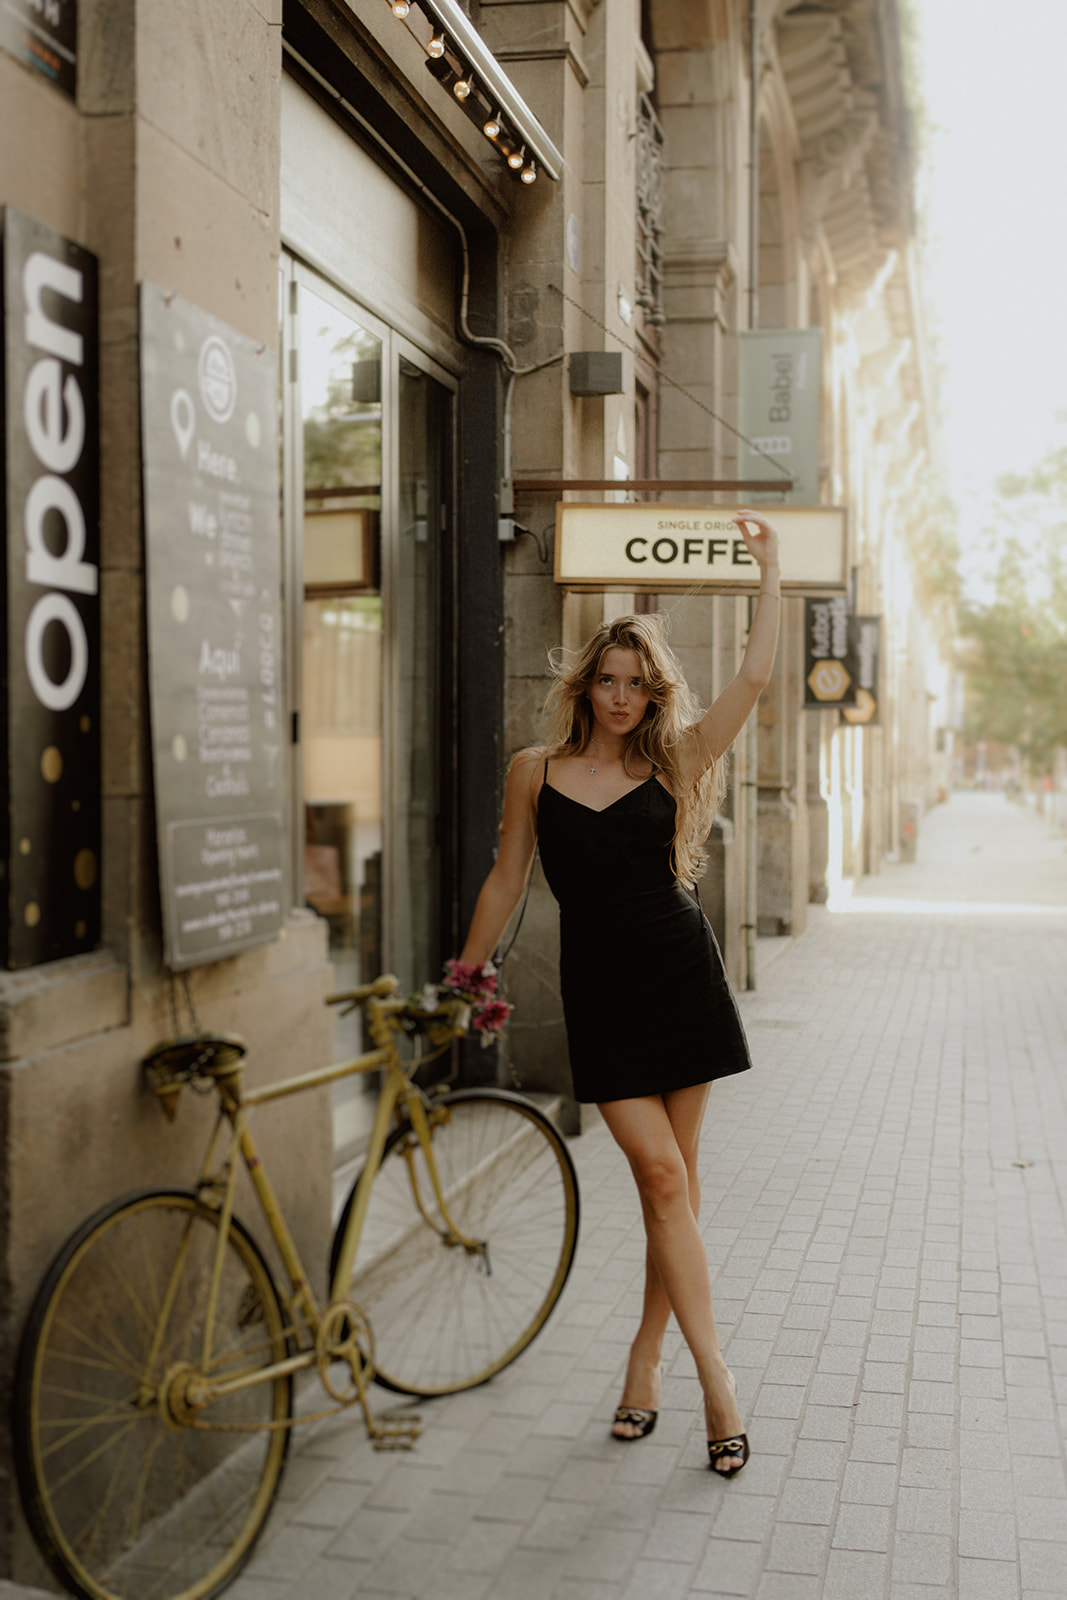 Lifestyle photography in Barcelona